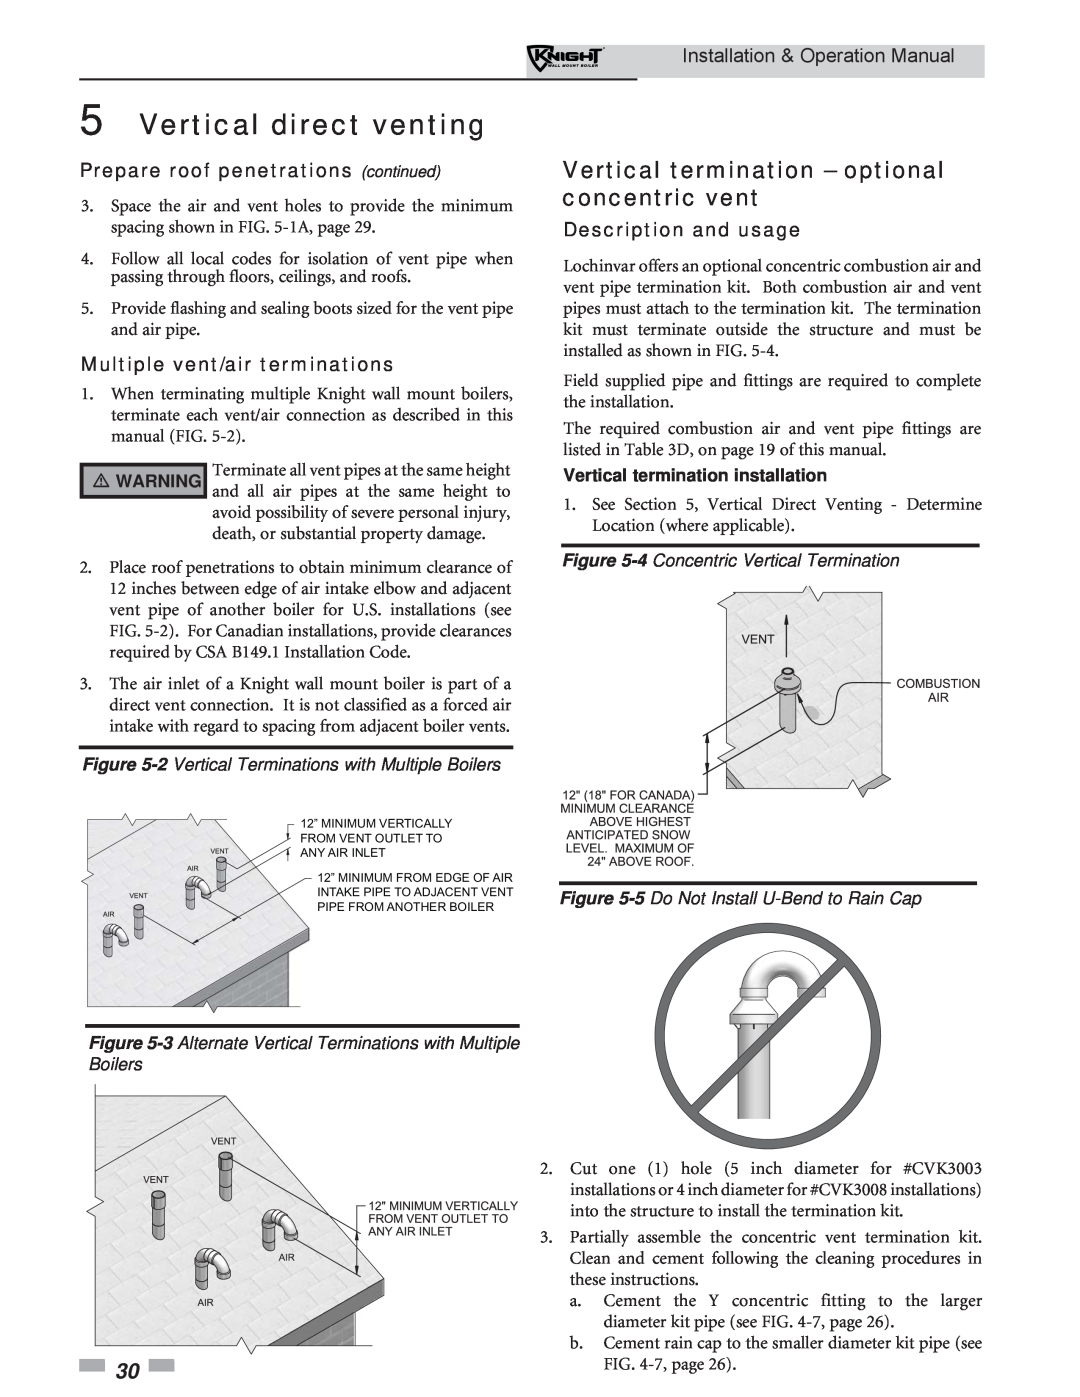 Lochinvar WH 55-399 operation manual Vertical termination – optional concentric vent, Prepare roof penetrations continued 